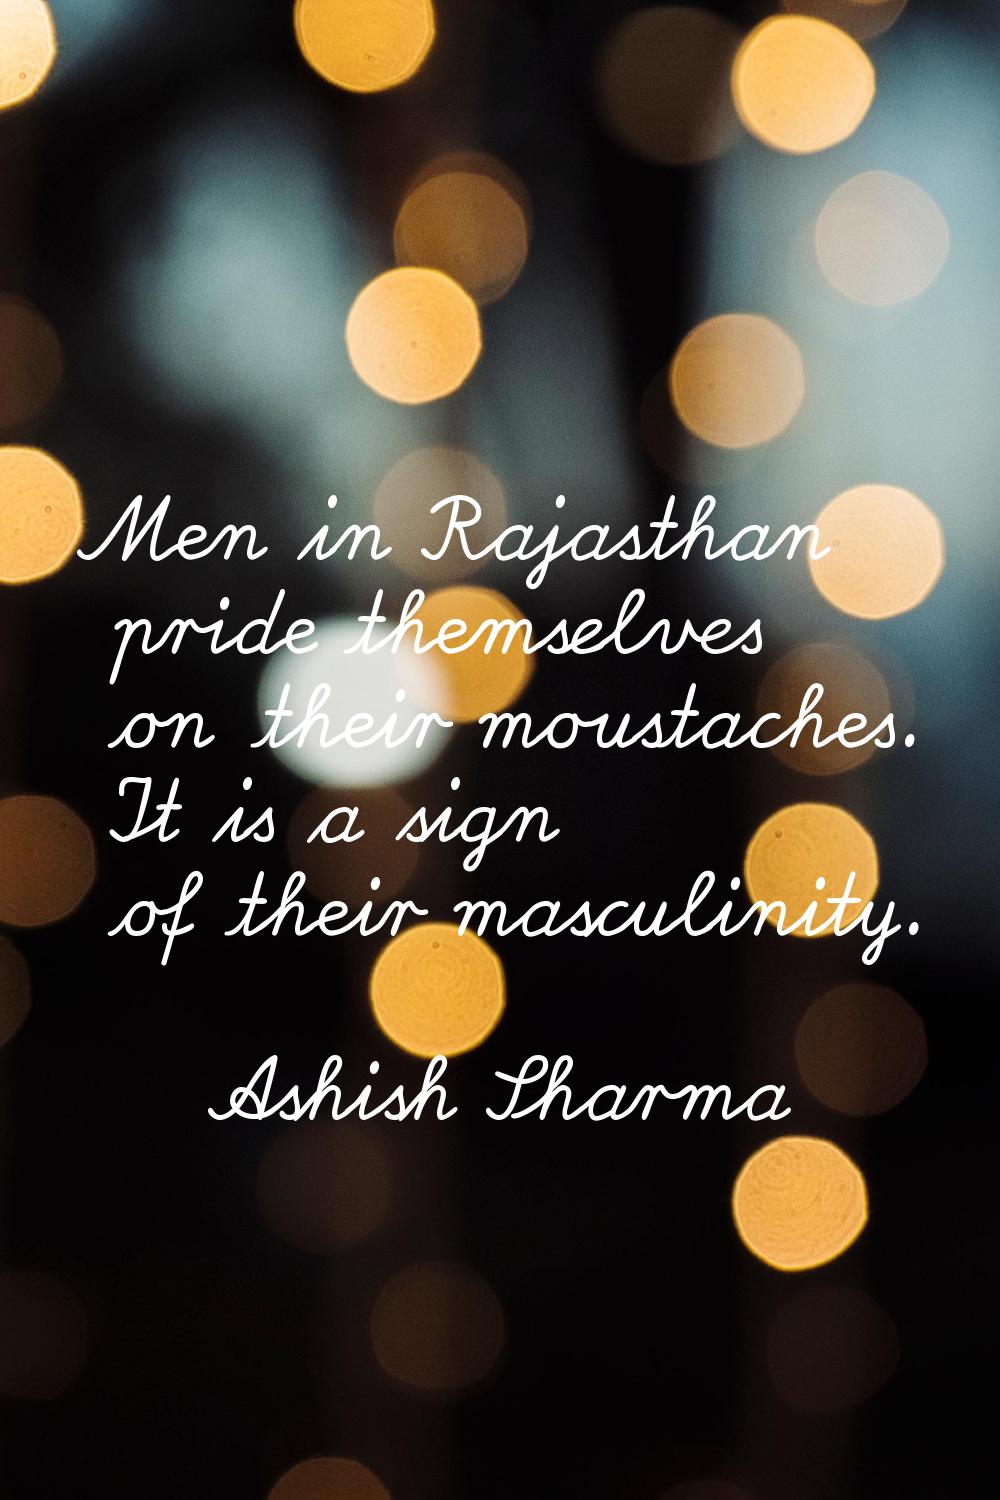 Men in Rajasthan pride themselves on their moustaches. It is a sign of their masculinity.